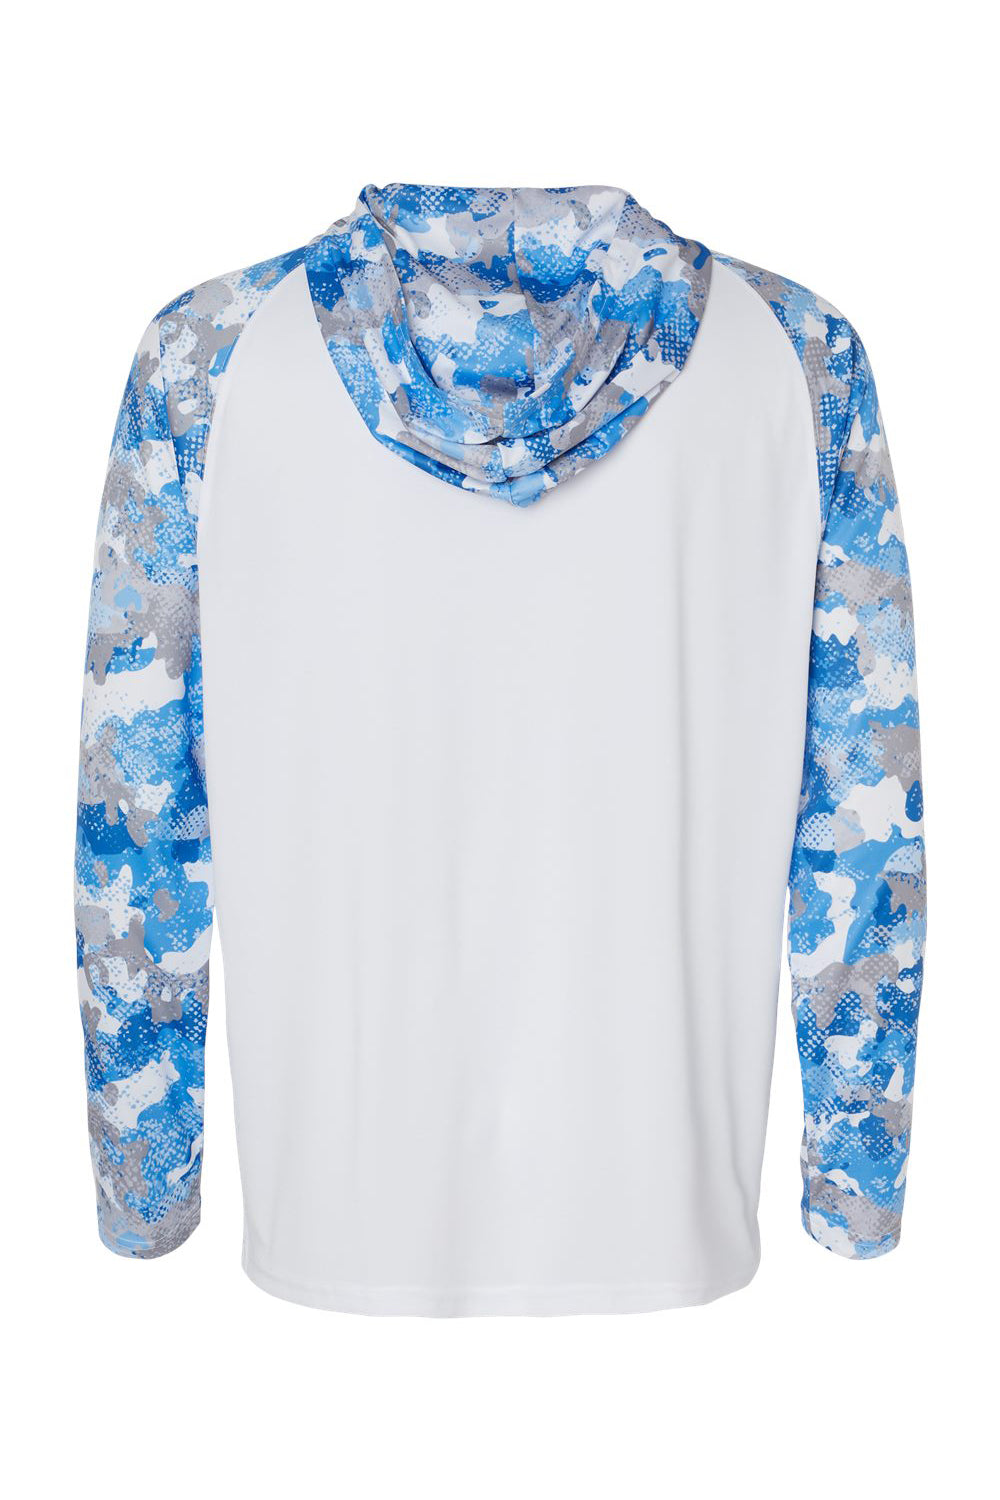 Paragon 240 Mens Tortuga Extreme Performance Long Sleeve Hooded T-Shirt Hoodie White/Blue Mist Camo Flat Back